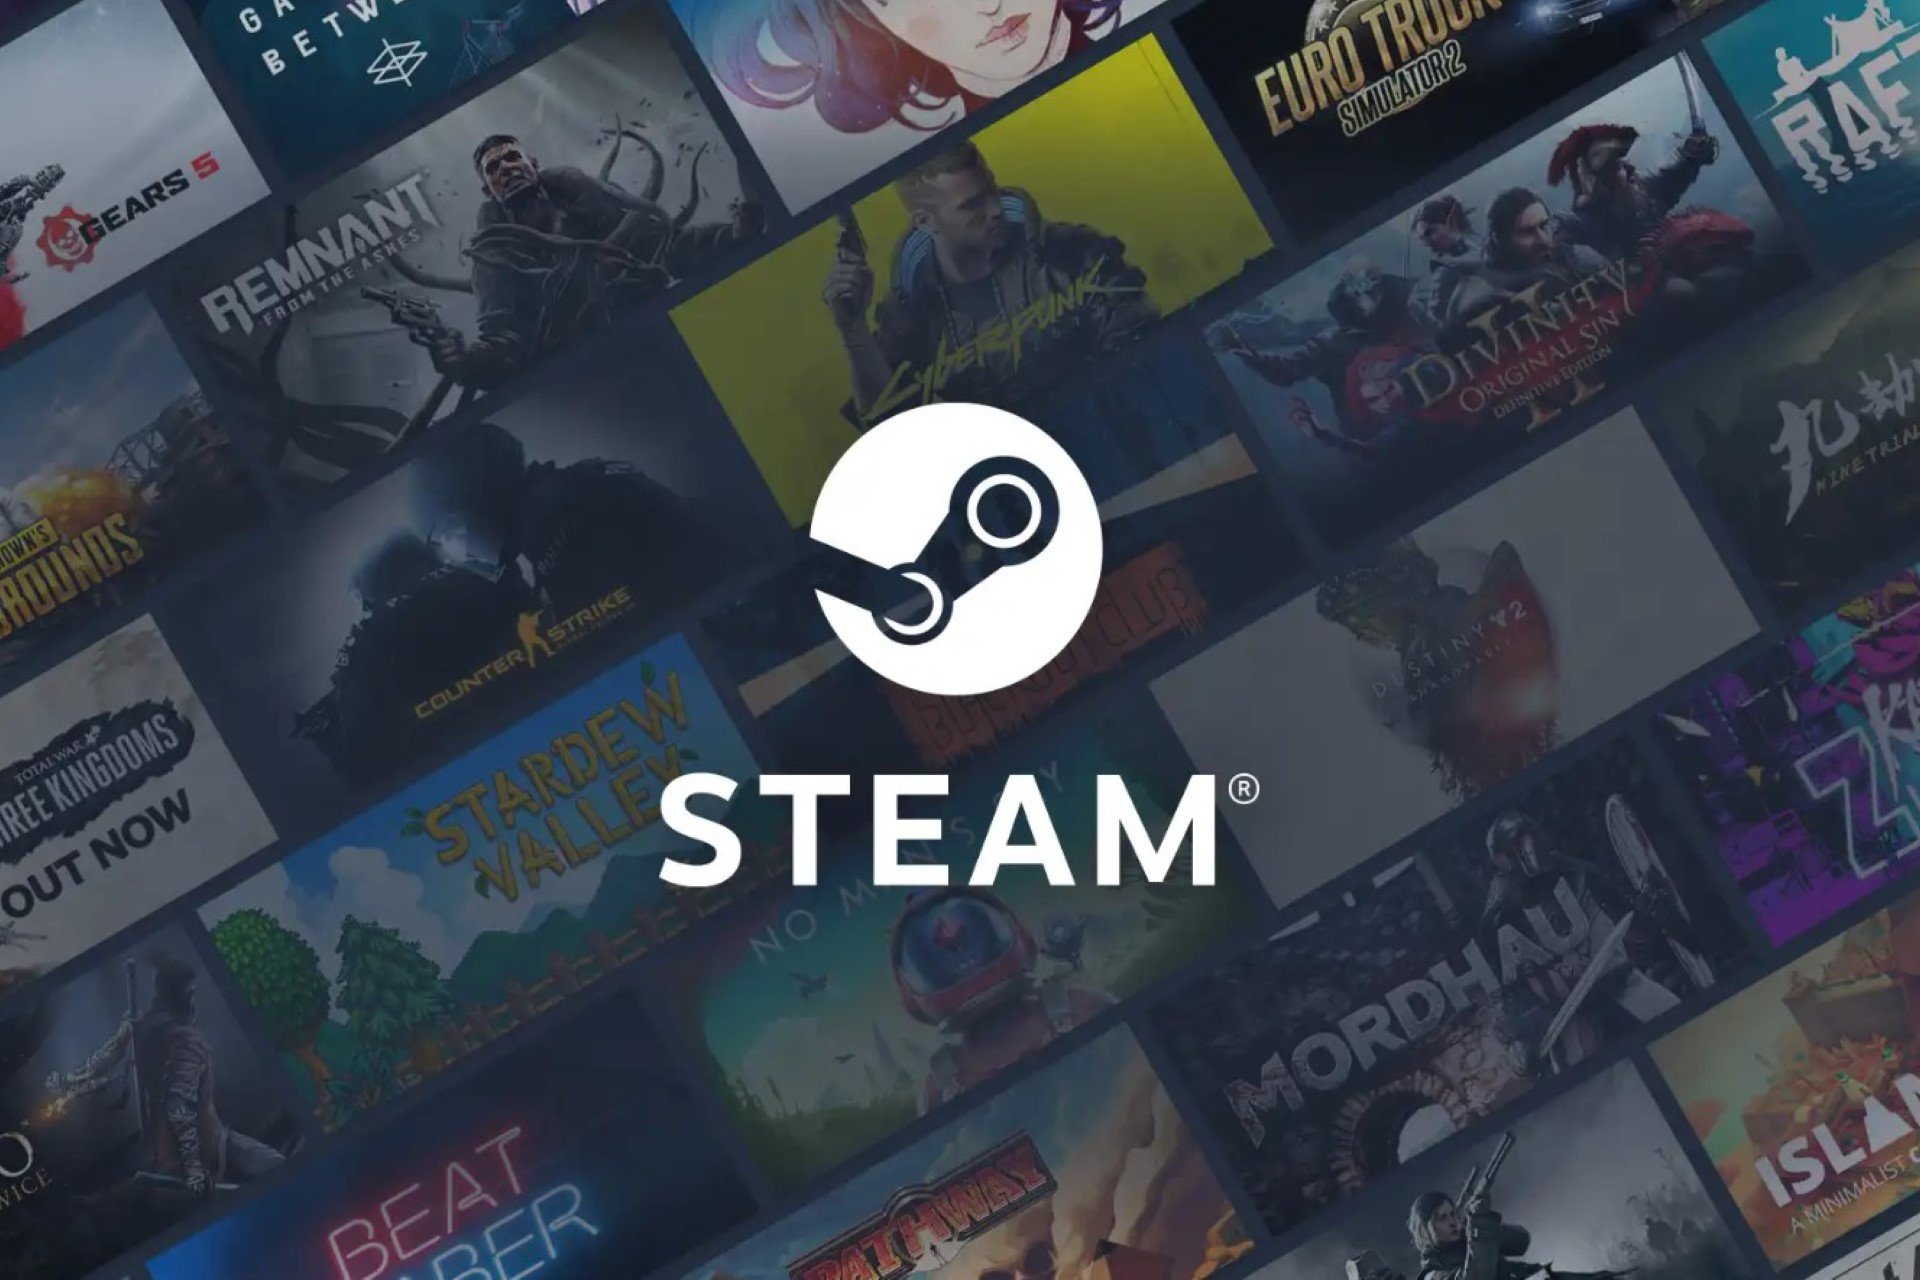 Steam ends support for Windows 7 and 8.1